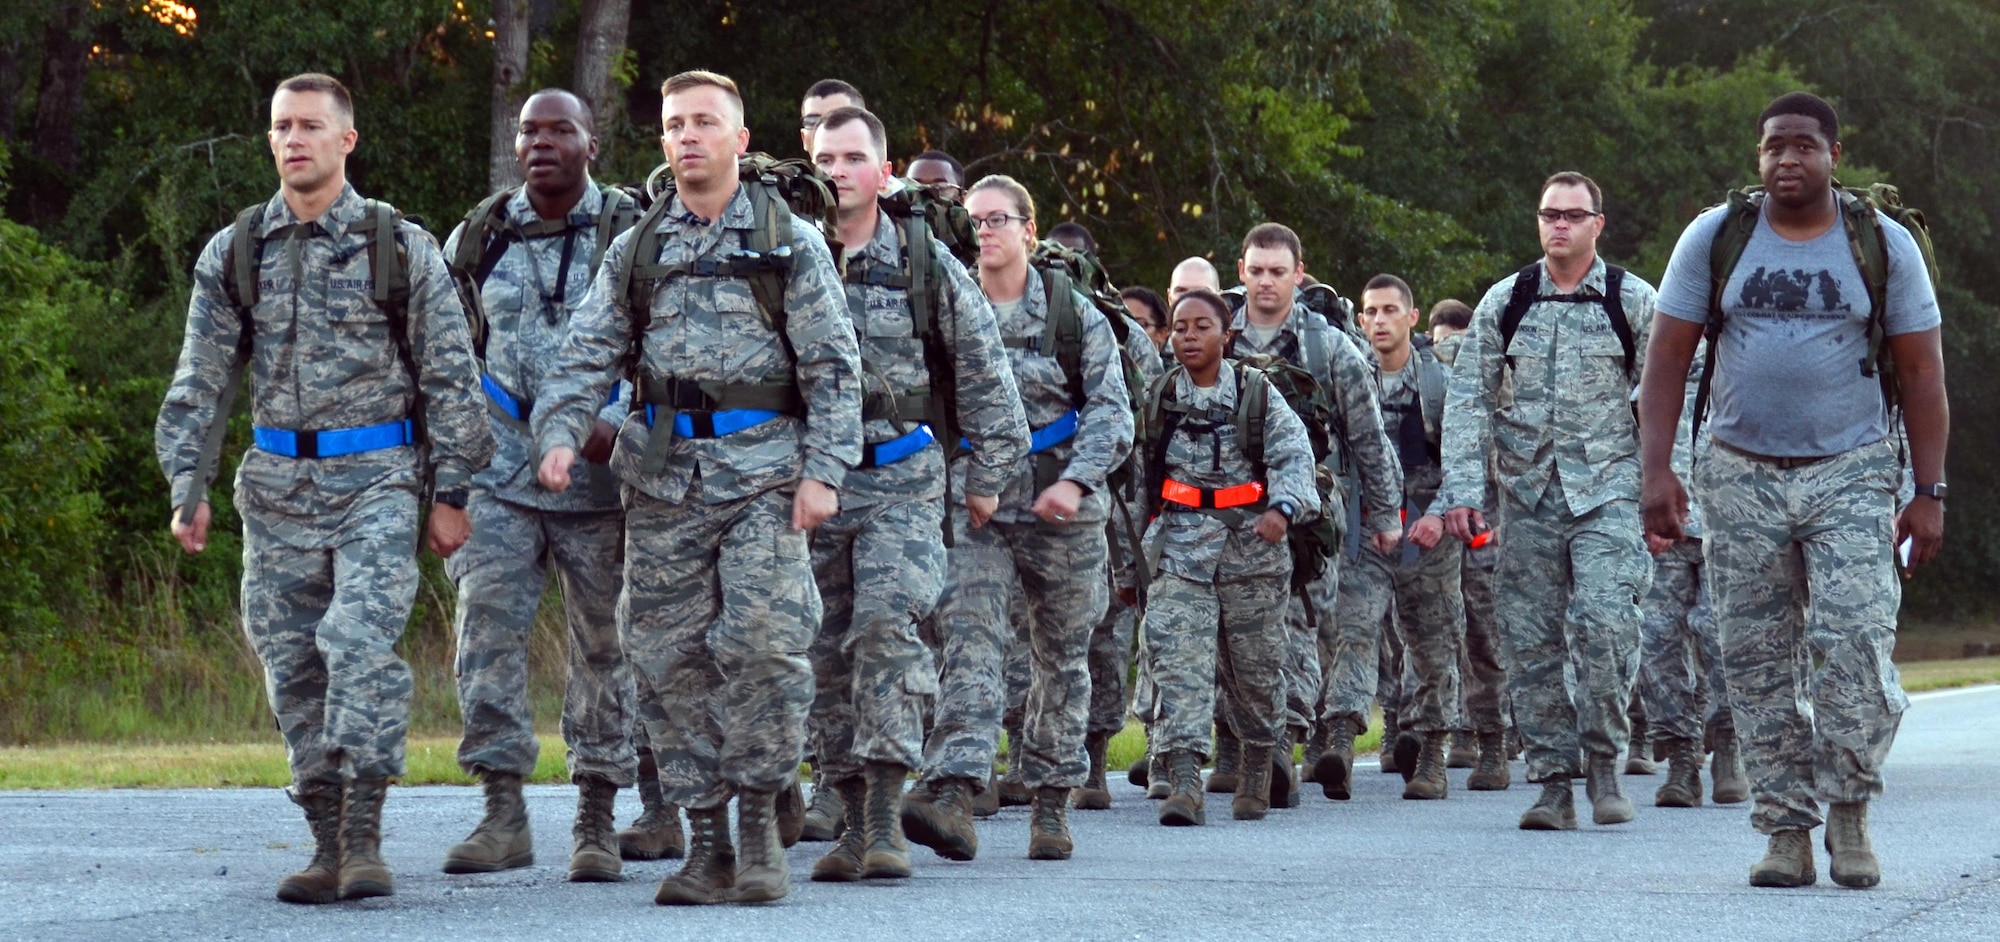 2nd Lt. Caleb Walker and 2nd Lt. David Edwards, chaplain candidates, lead the rest of the candidates on a 2.8 mile ruck march while Chaplain (Maj.) Stacey Hanson, 94th Airlift Wing, and an Instructor from the 5th Combat Communications Squadron Support, march along side them at Robins Air Force Base, Georgia, July 25. The candidates are participants in the Air Force Reserve Command Chaplain Candidate Intensive Interview program which aims to provide an extensive overview of the Air Force Reserve mission and military chaplain corps.(U.S. Air Force photo/Tech. Sgt. Kelly Goonan)